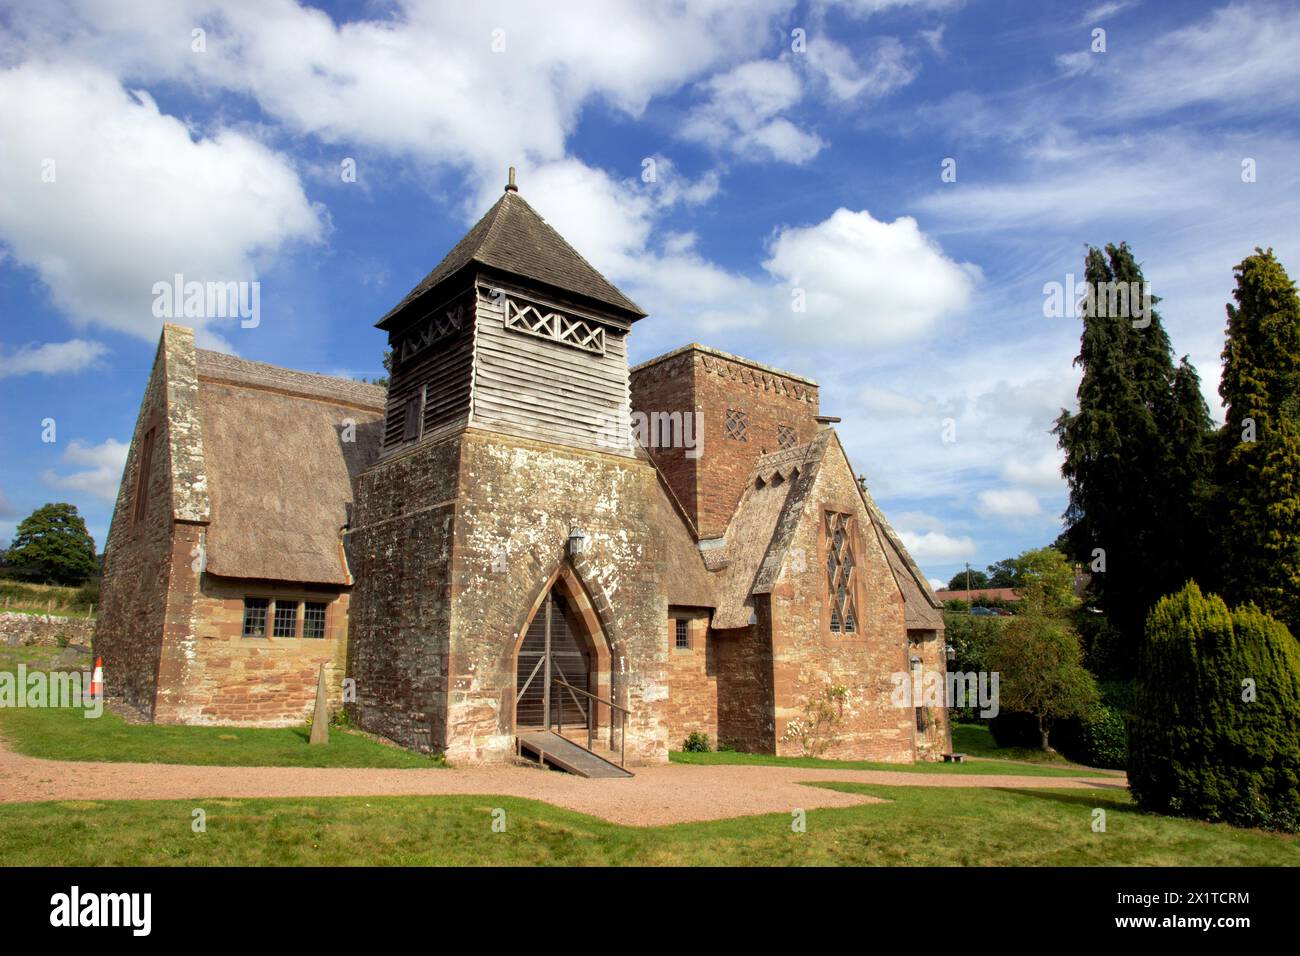 All Saints’ Church, Brockhampton, a Grade I listed building, was designed and built in 1902 by William Lethaby, a leading Arts and Crafts architect. Stock Photo